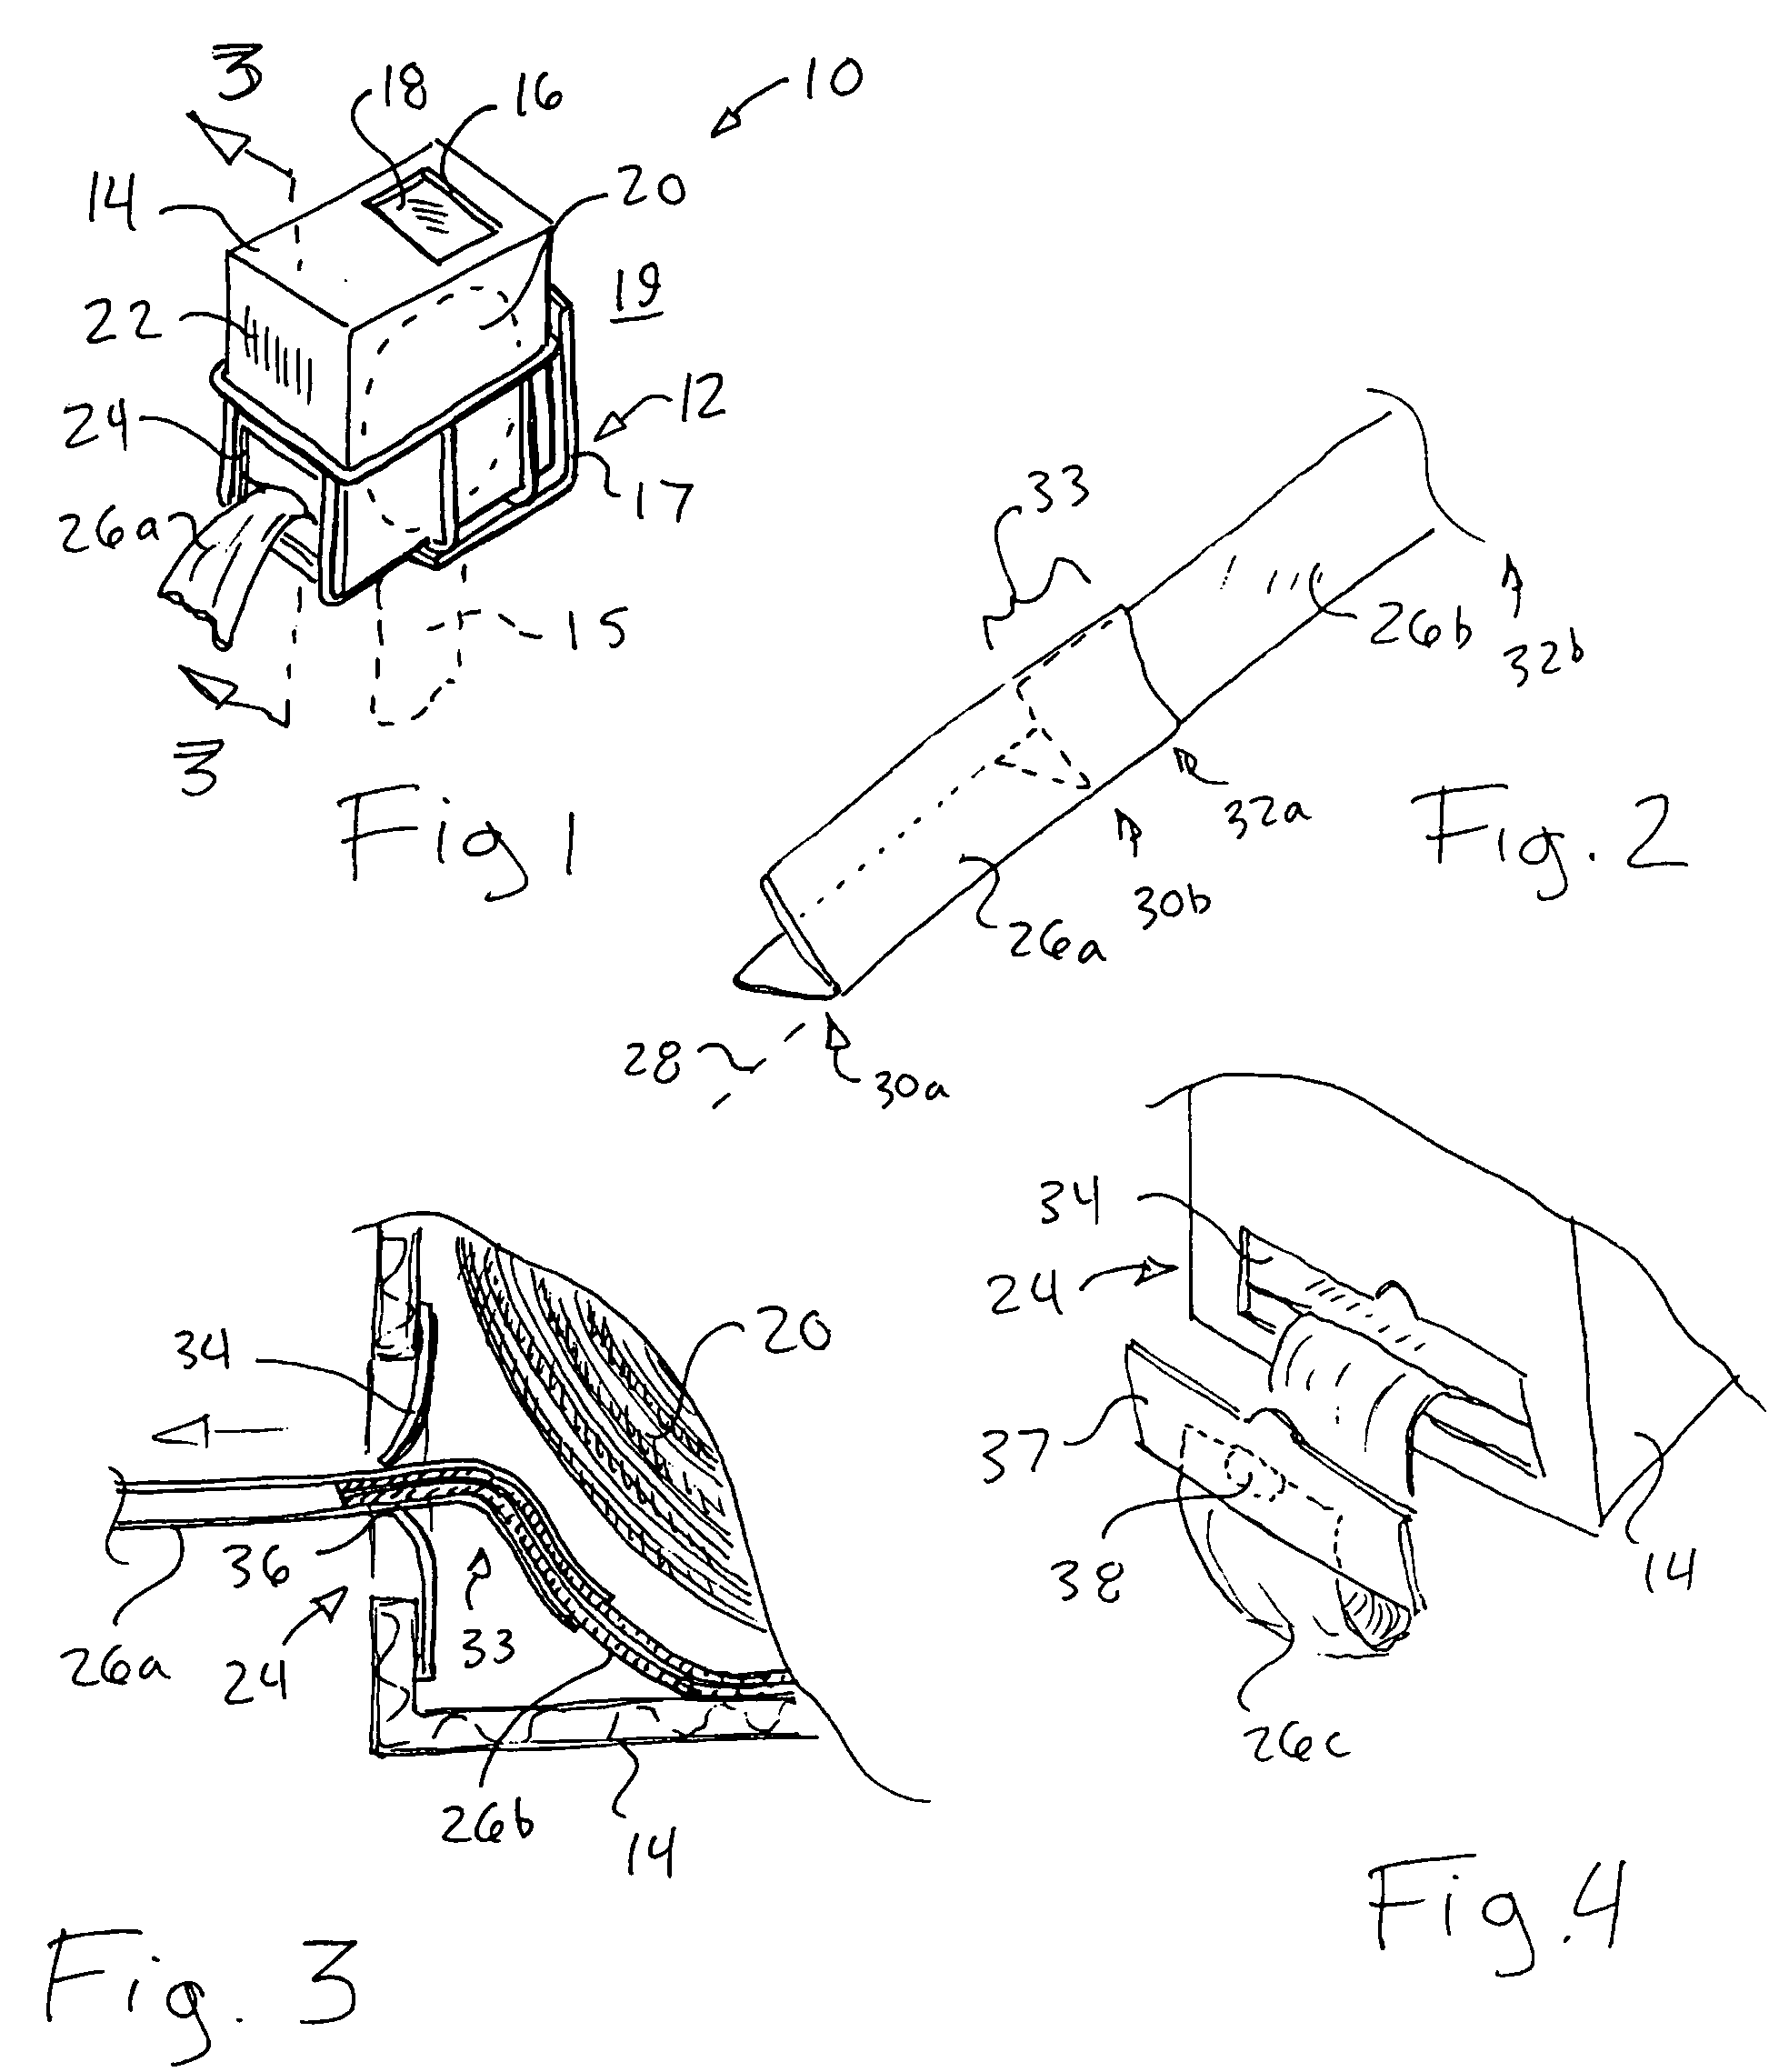 Produce bag dispensing system for reducing wasted bags